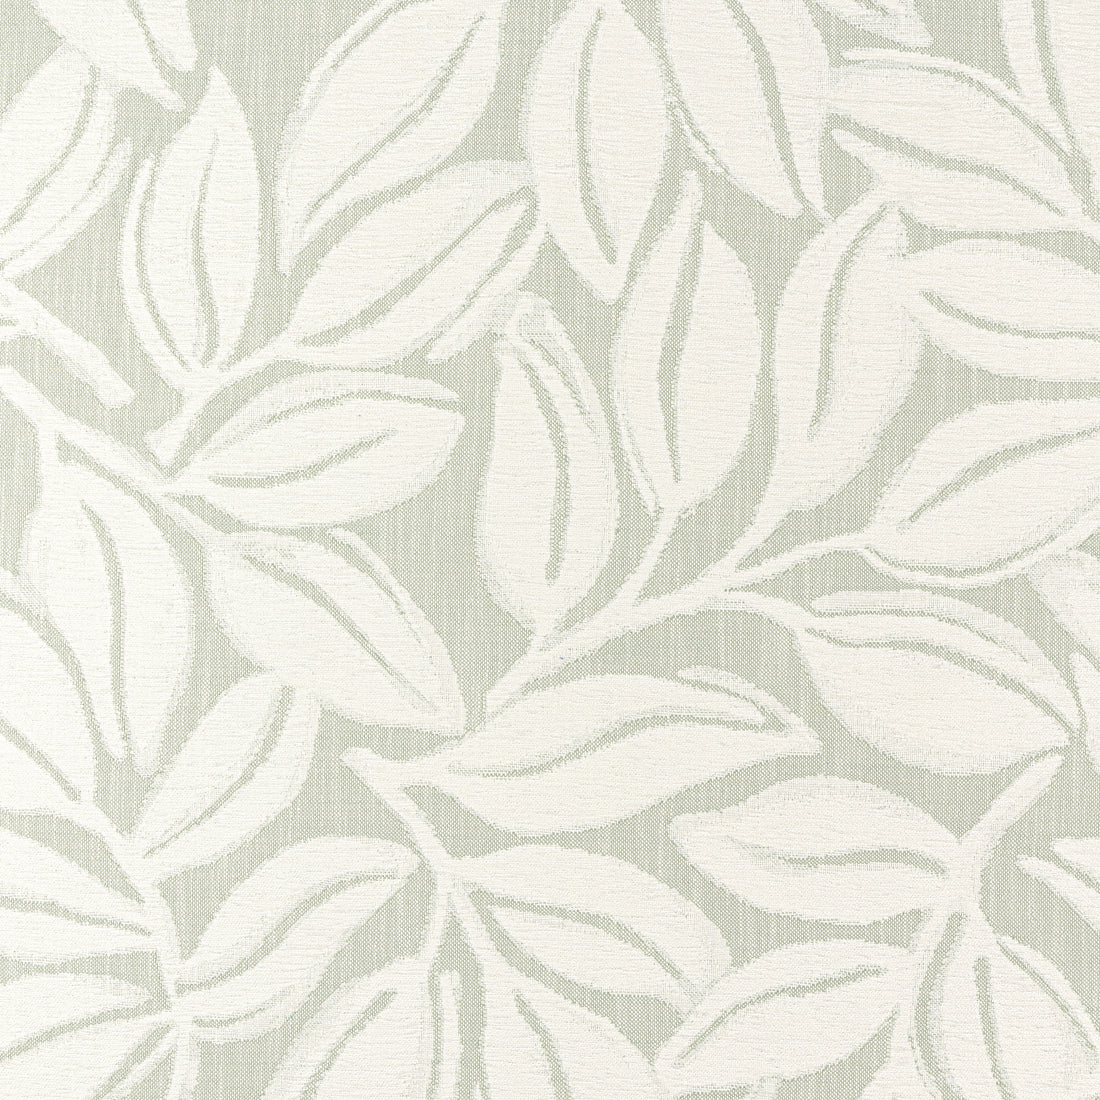 Kona fabric in aloe color - pattern number W8811 - by Thibaut in the Haven collection